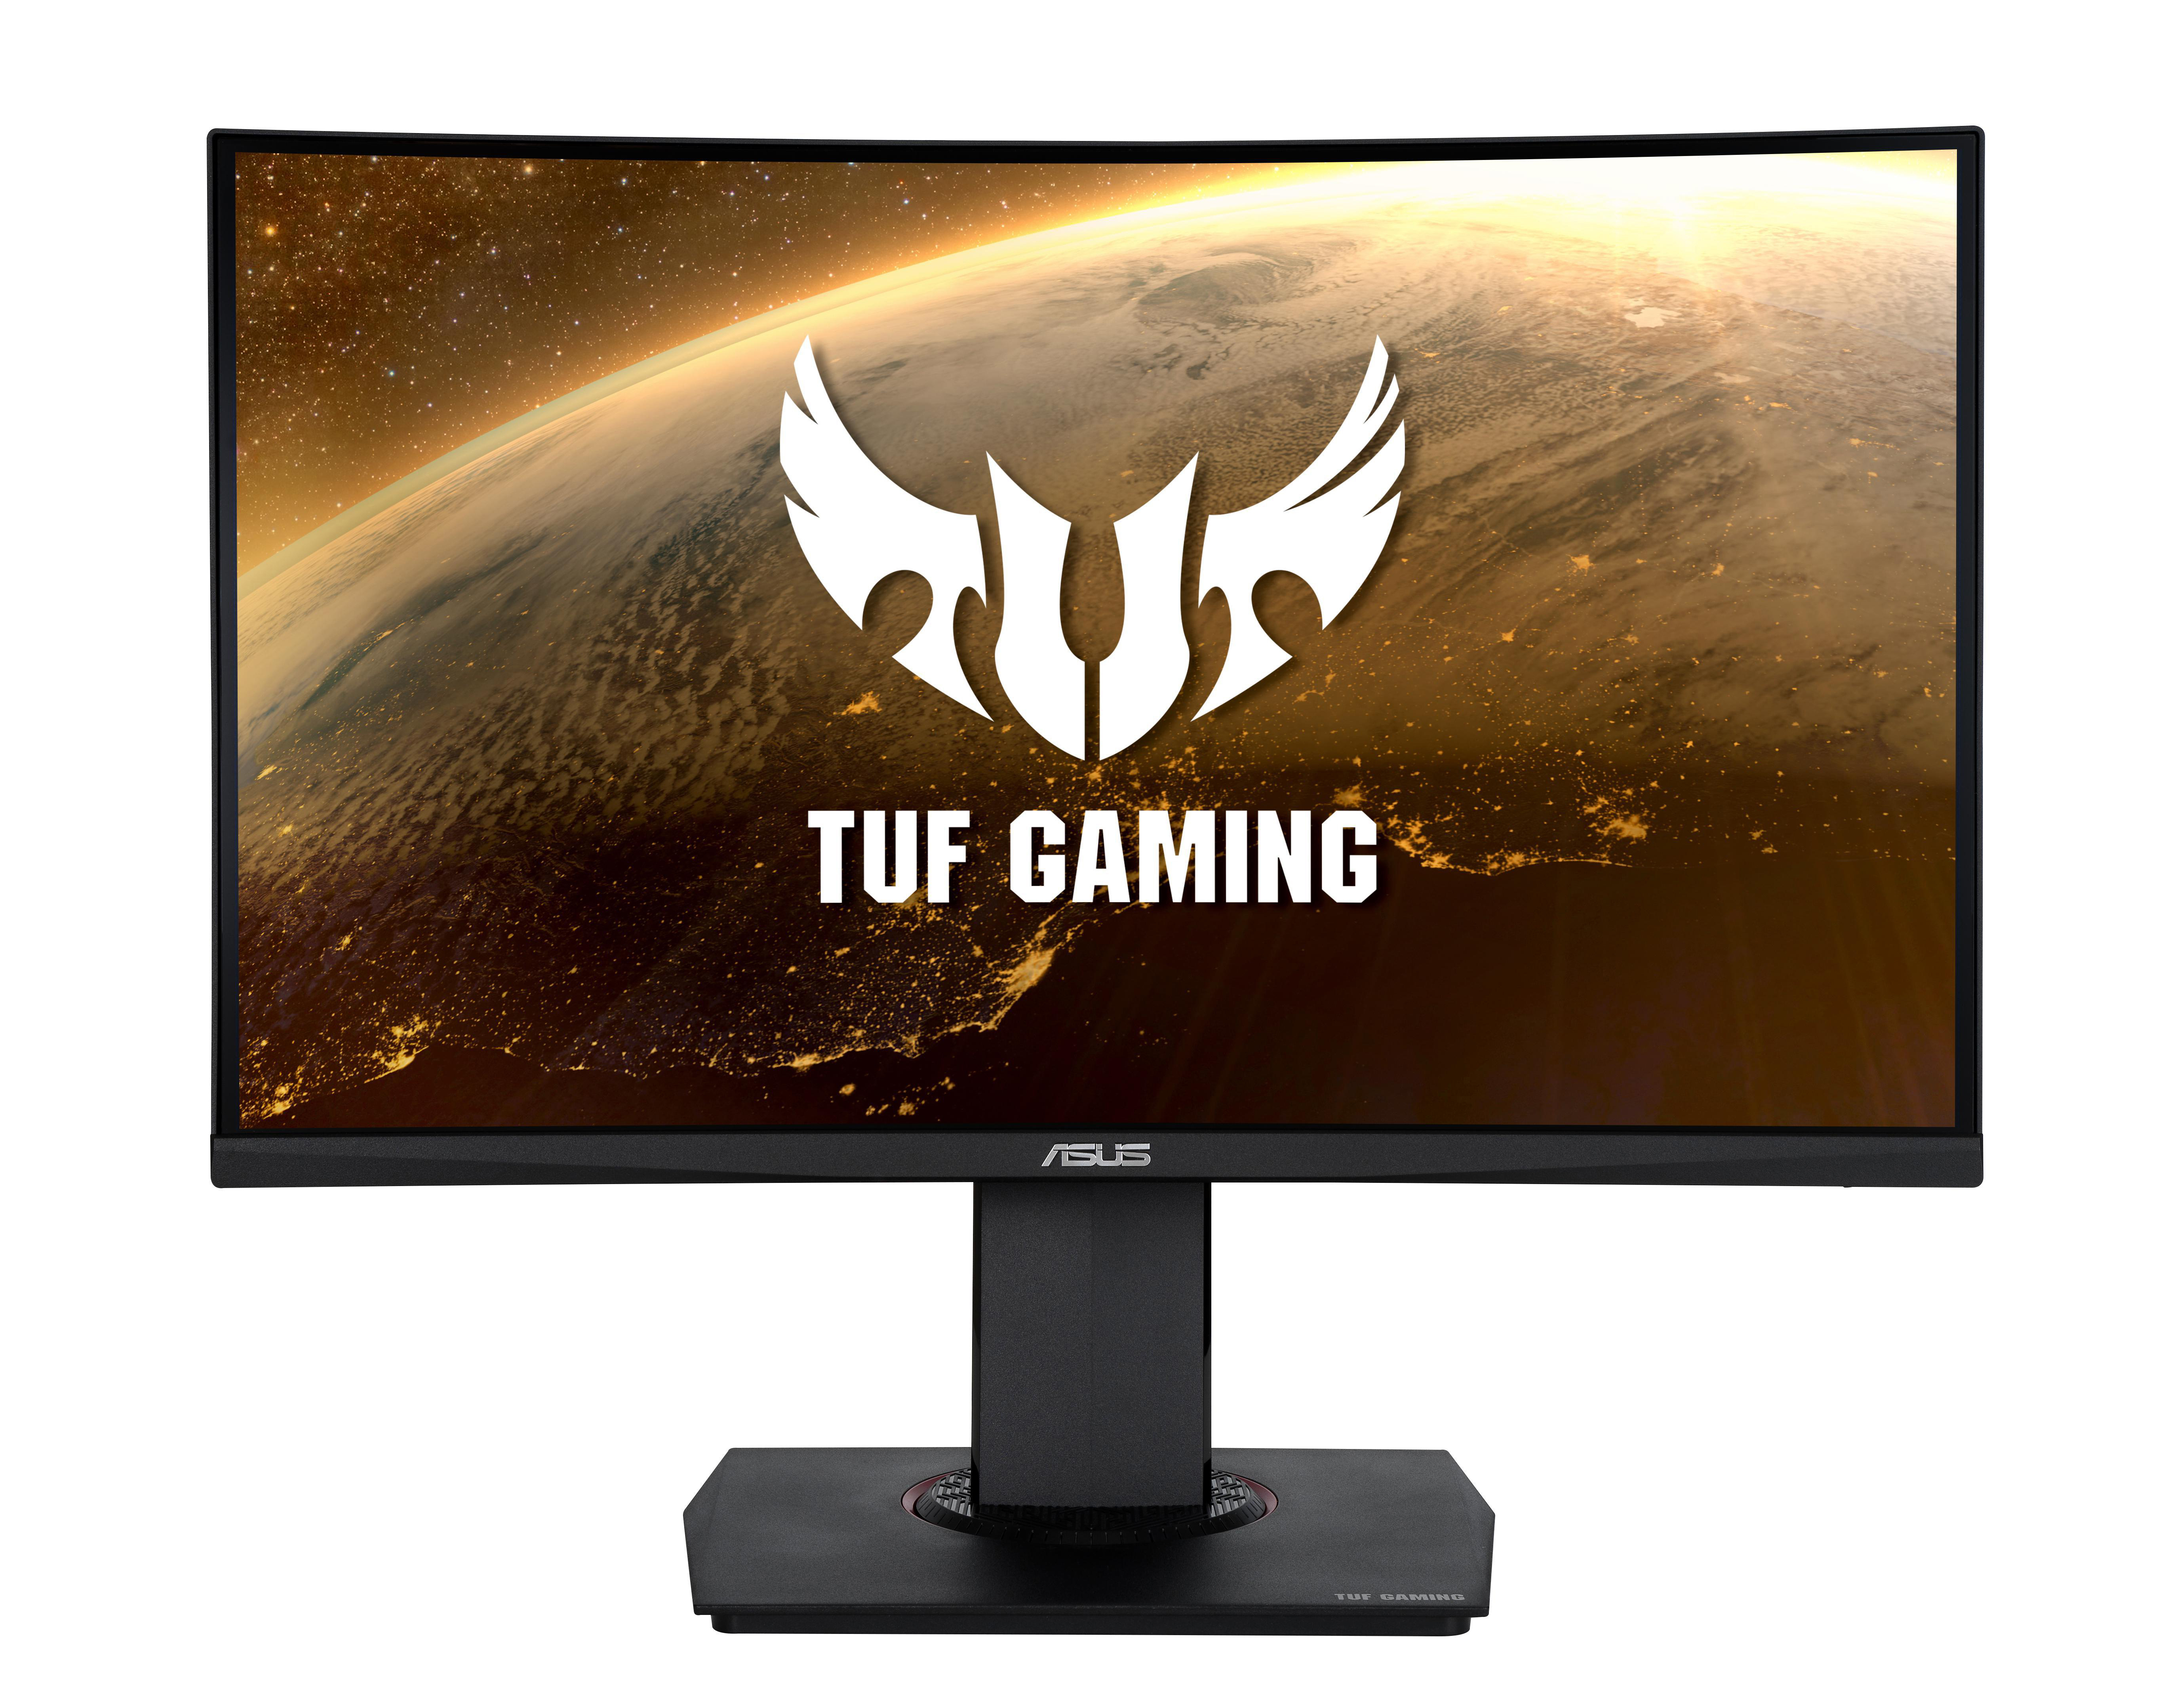 ASUS VG24VQR 23,6 Zoll Full-HD Gaming Monitor (1 ms Reaktionszeit, 144 Hz)